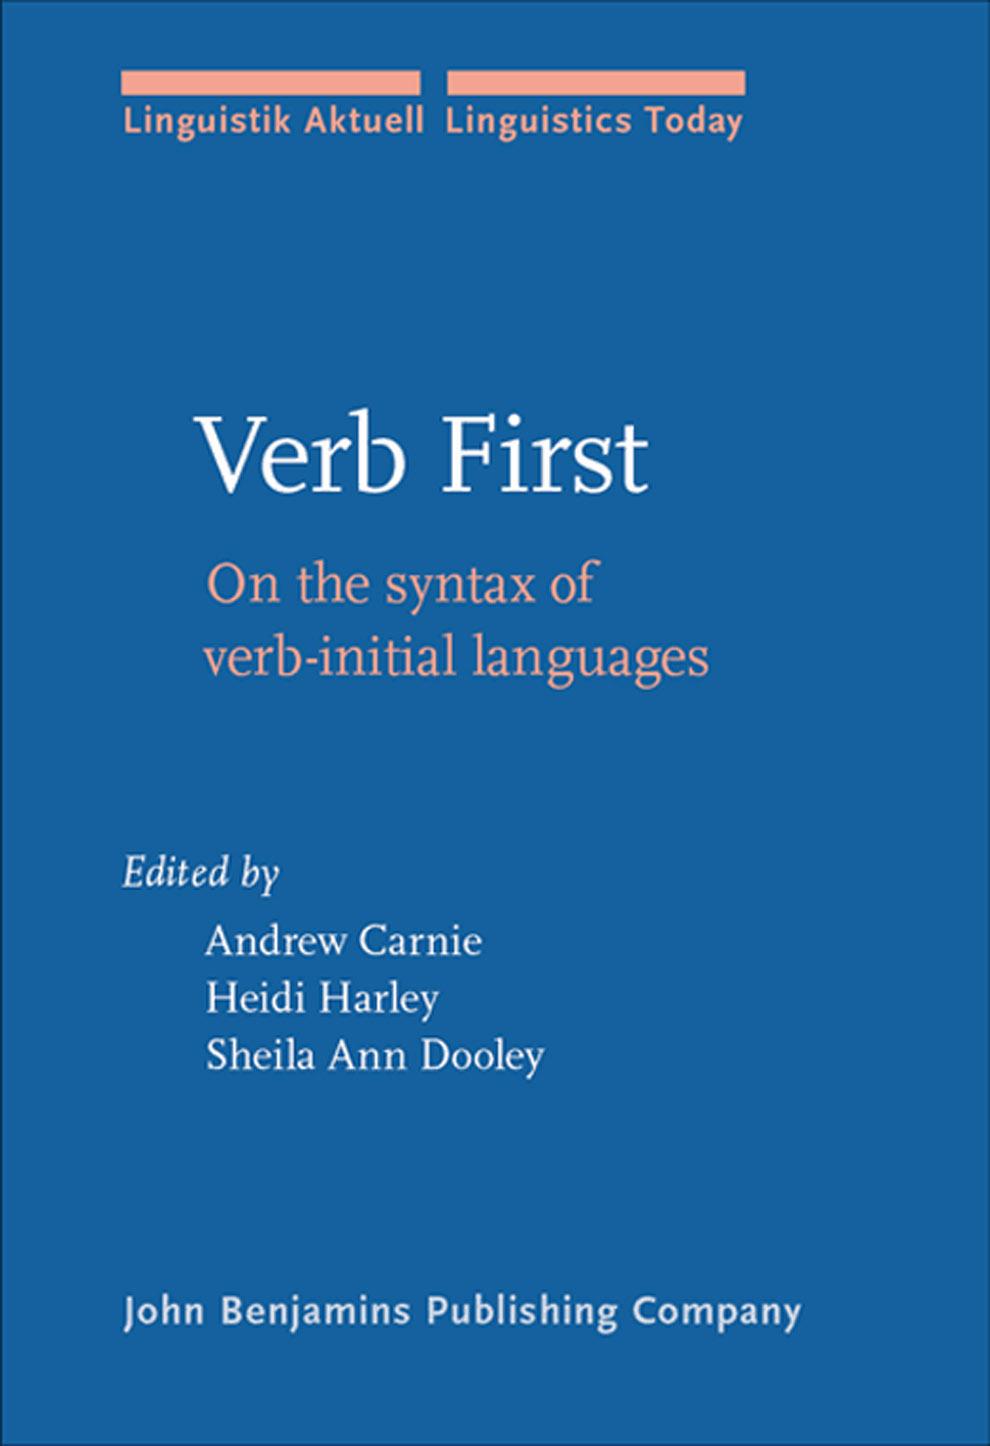 Verb First: On the Syntax of Verb-Initial Languages